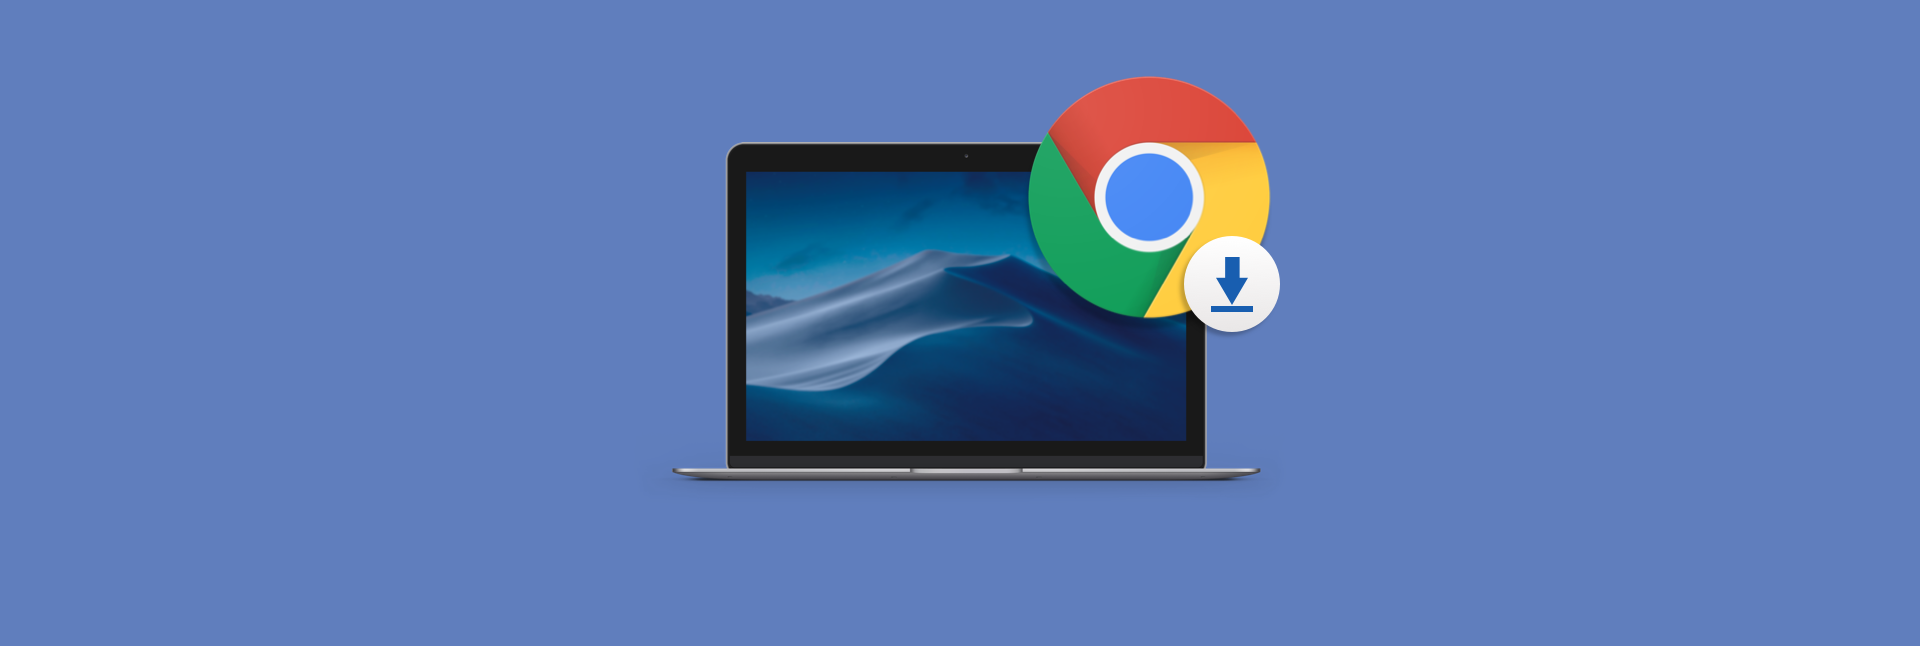 download google chrome for macbook pro